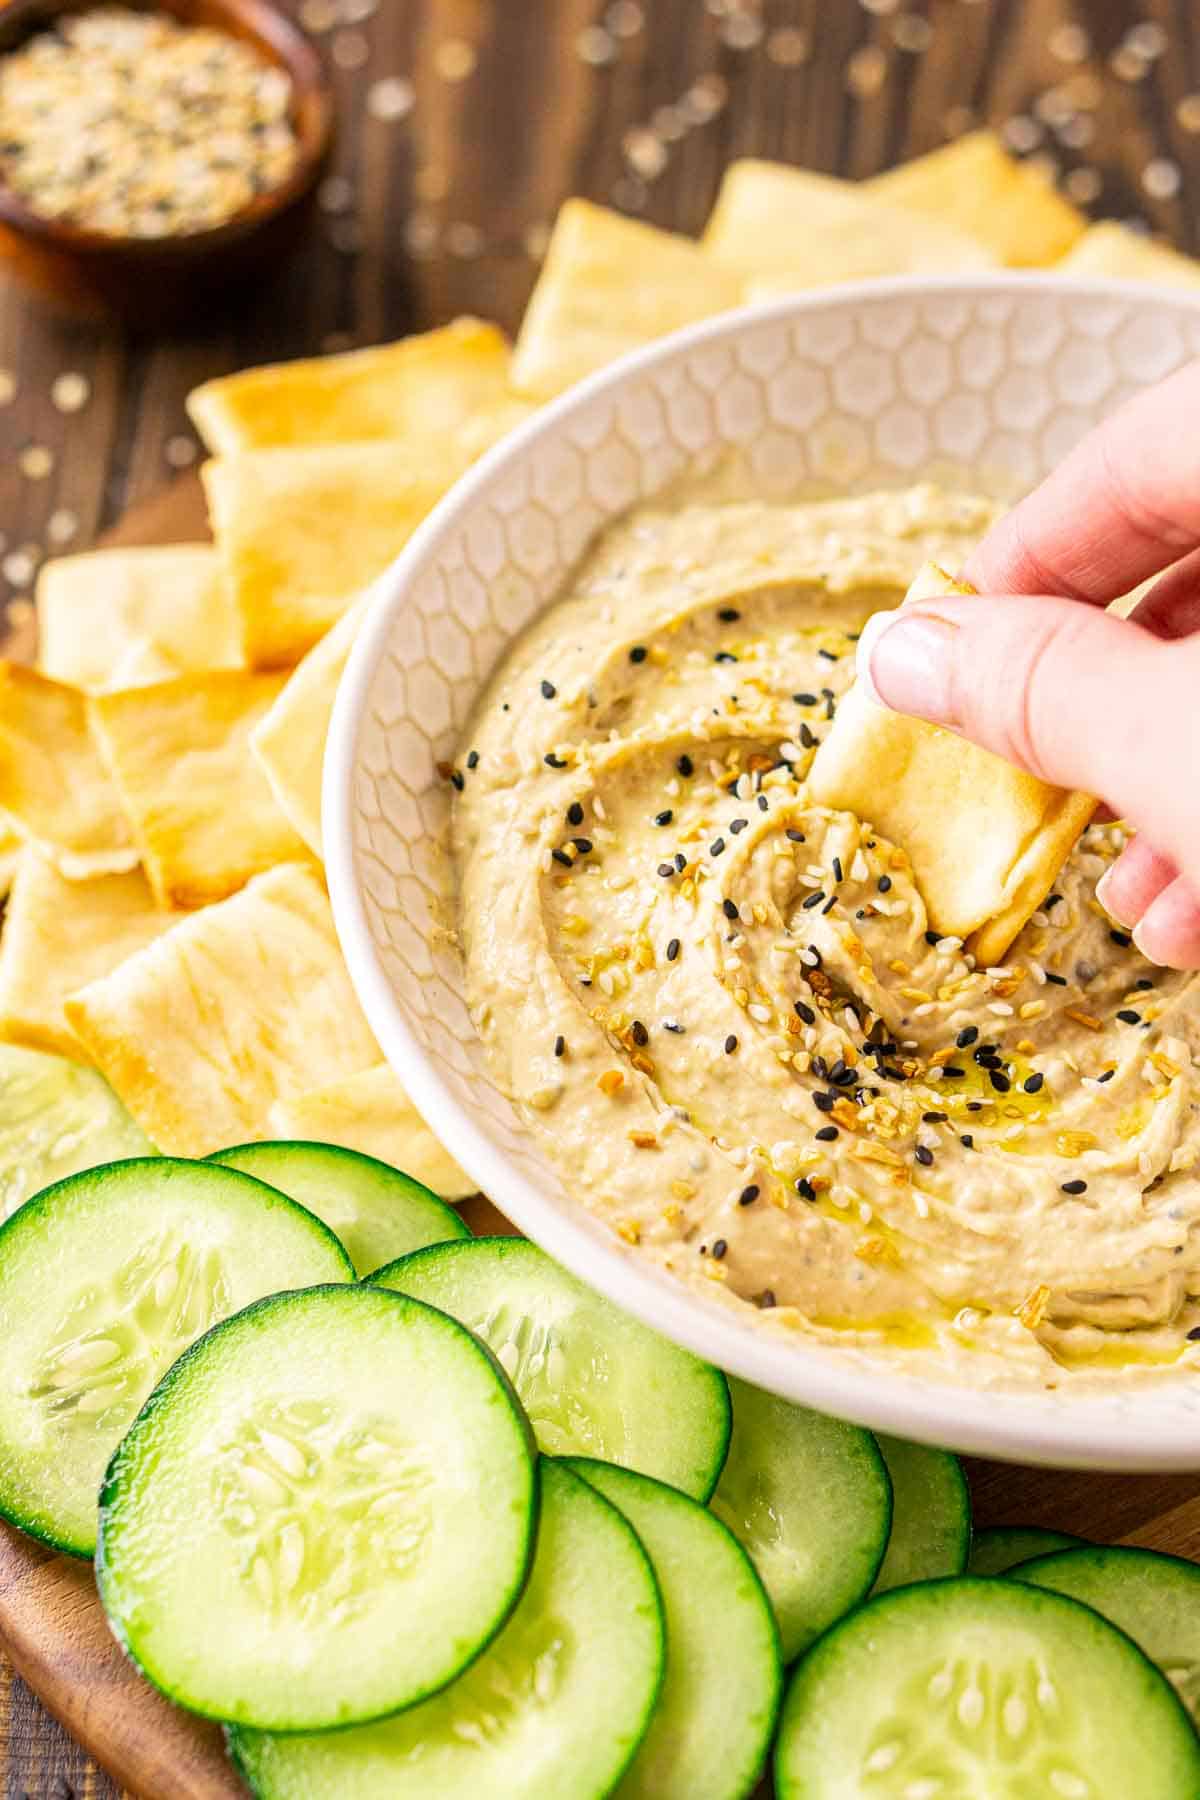 A hand dipping a pita chip into the bowl of everything bagel hummus with cucumber slices in front.